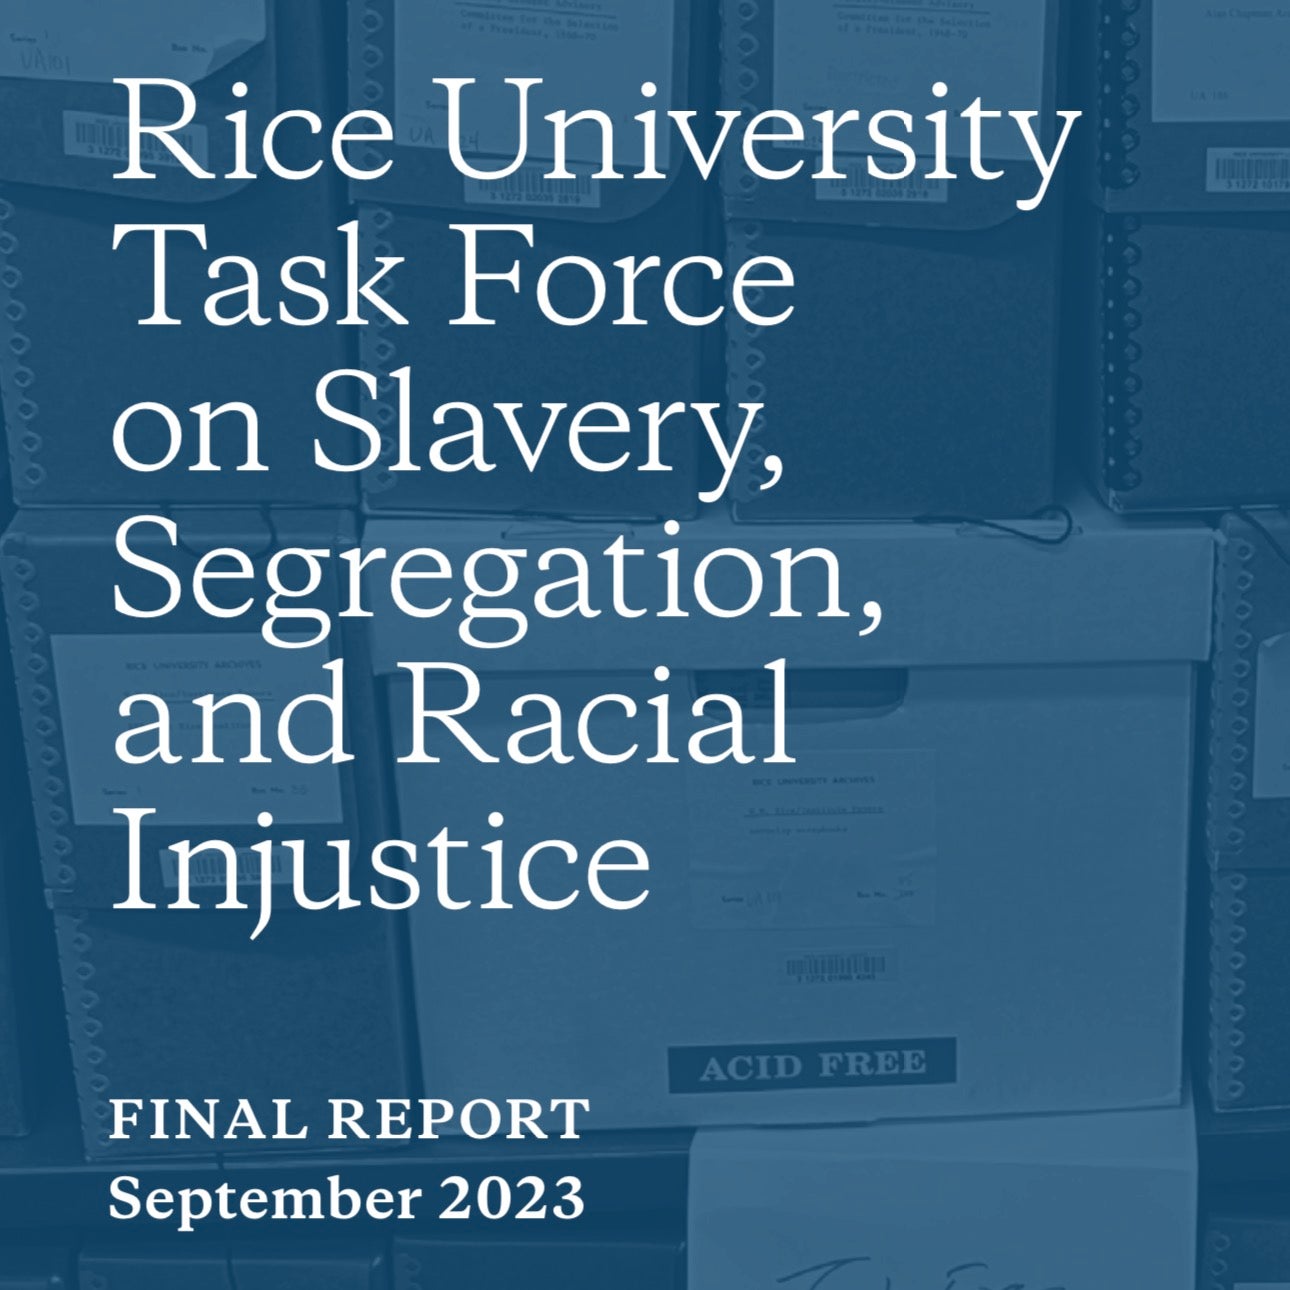 Final Report of the Task Force on Slavery, Segregation, and Racial Injustice